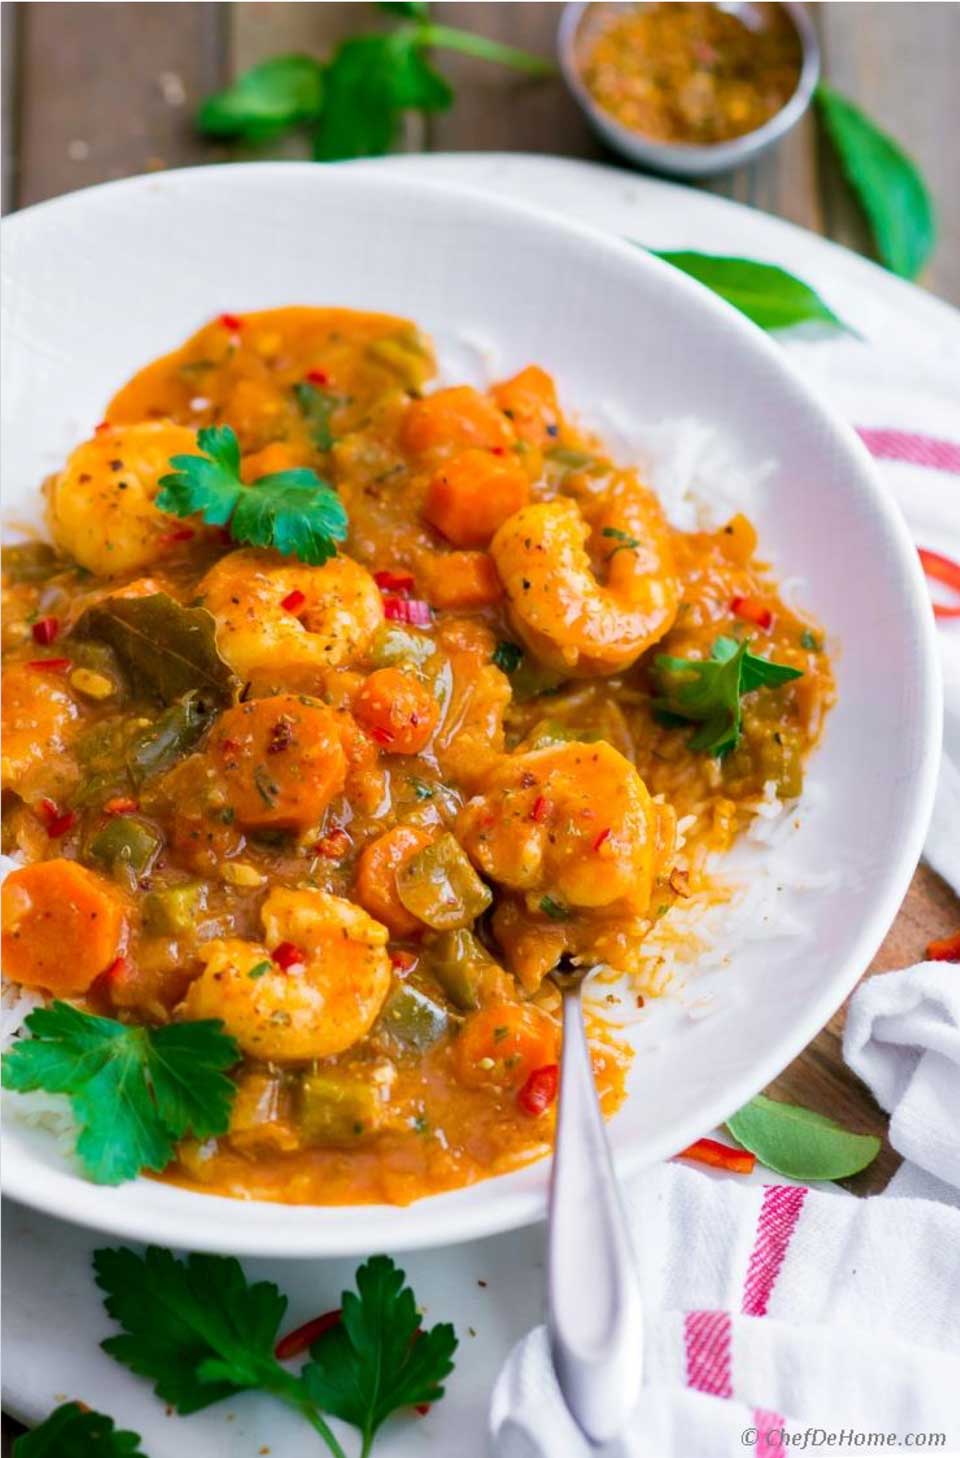 Gorgeous, flavor-packed, and a nutritious alternative to beef stews! This Shrimp Etouffee from Savita at Chef de Home is heart-healthy comfort food you can feel good about serving! Be sure to check out all our electric pressure cooker stew recipes and tips!